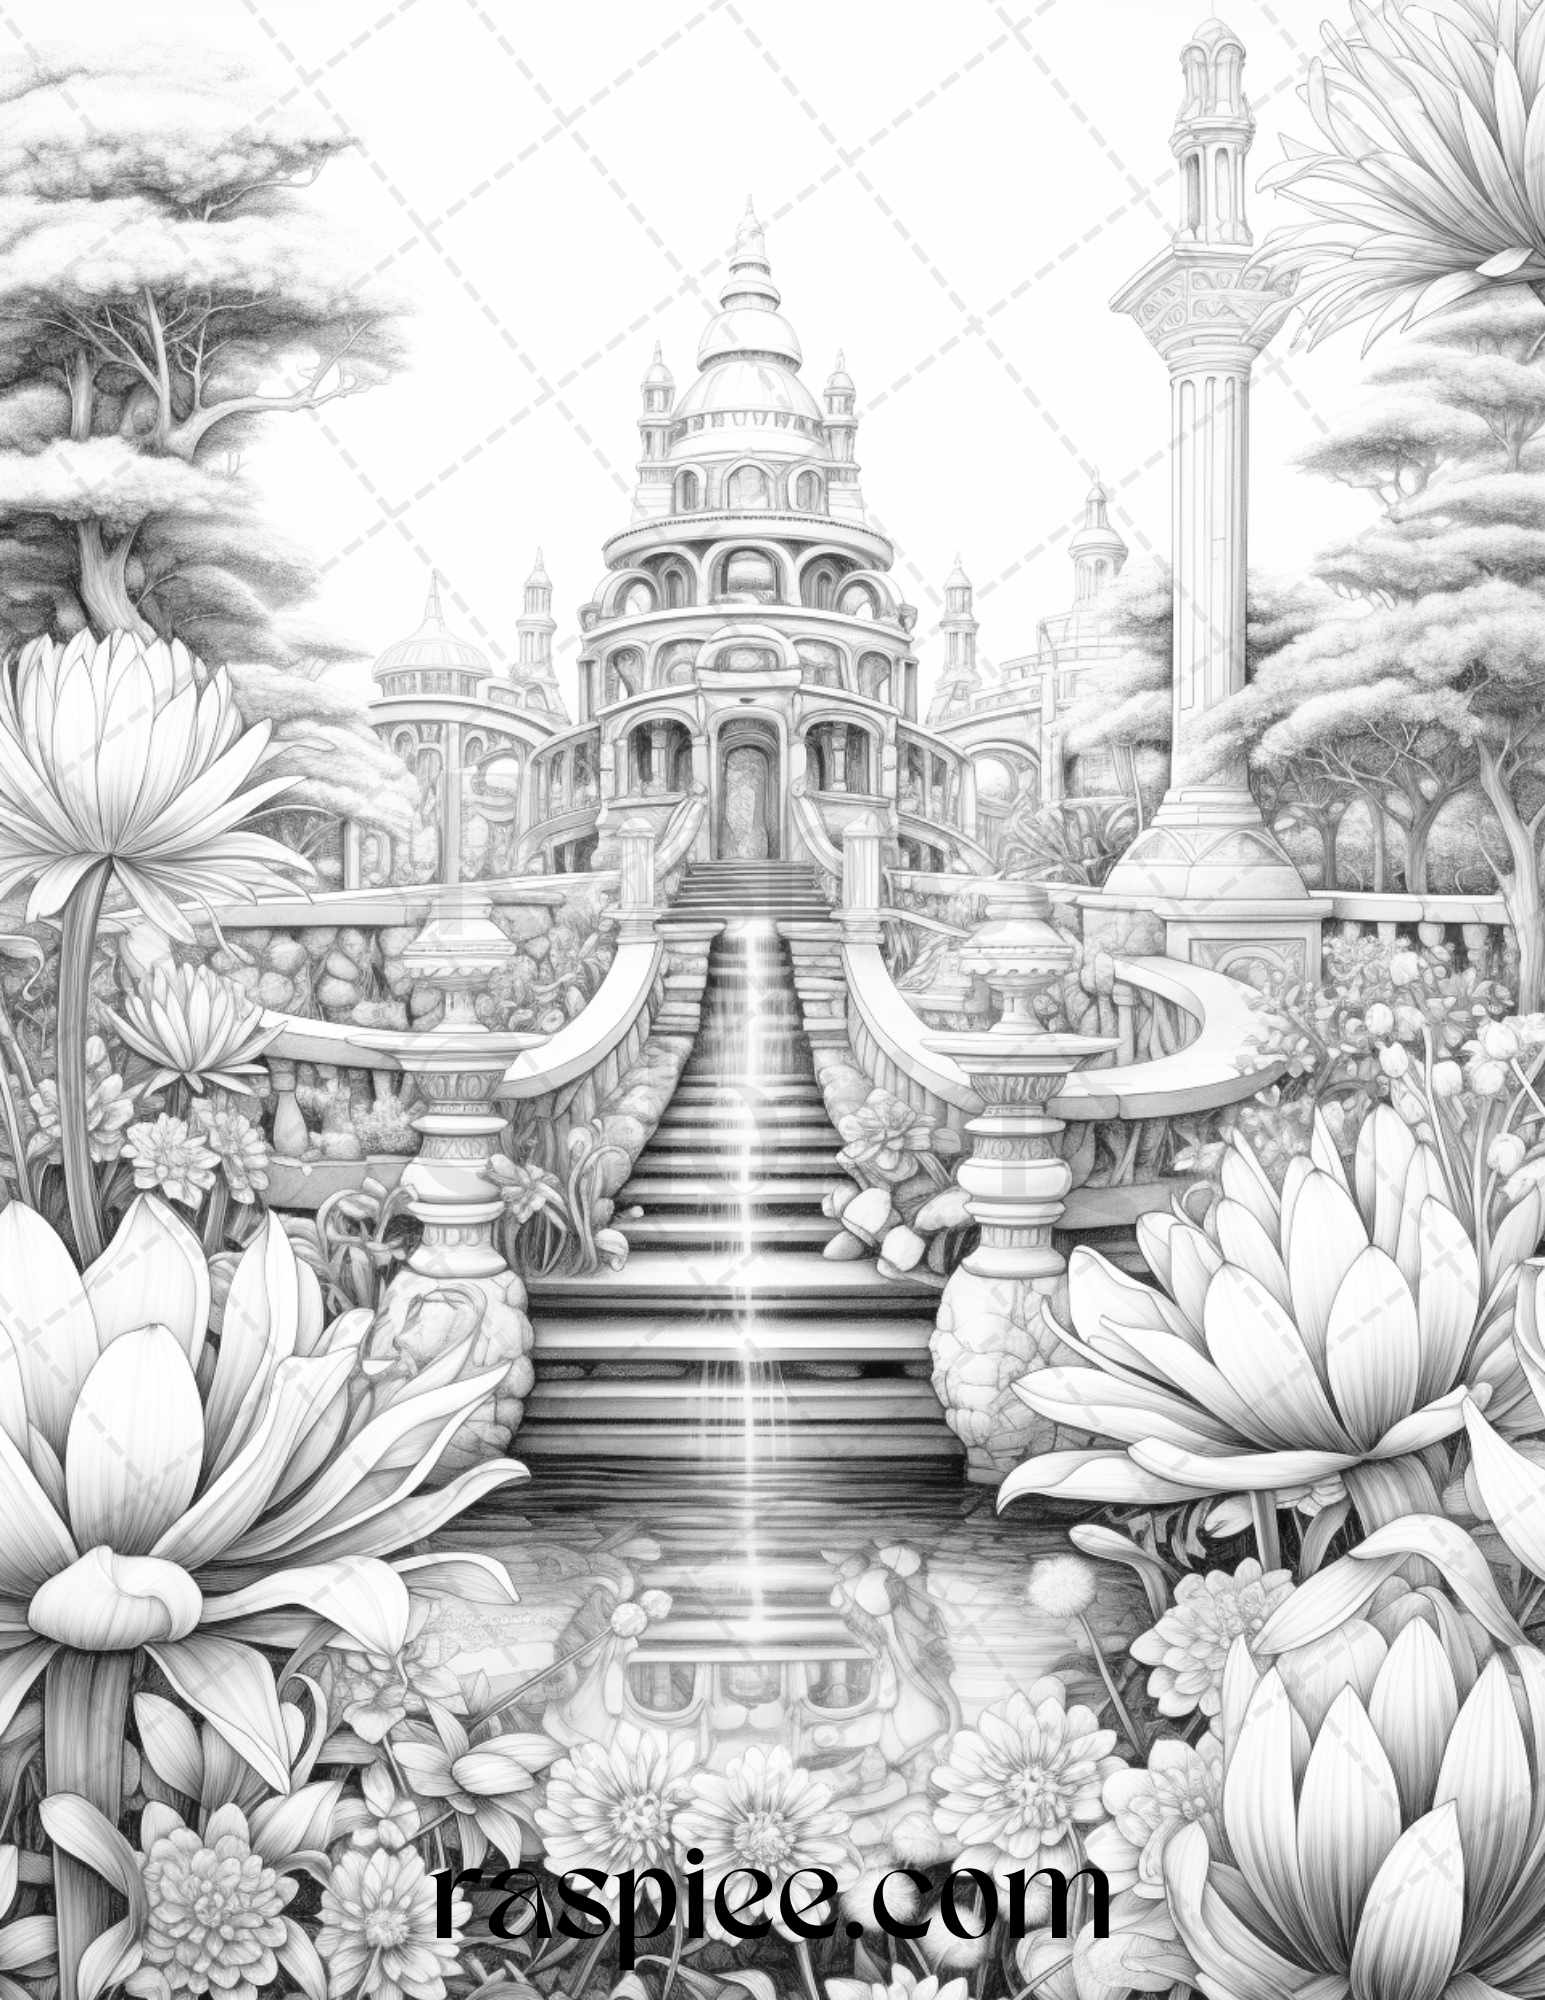 Mystical World Grayscale Coloring Pages, Adult Printable Coloring Pages, Fantasy Designs Coloring Sheets, Instant Download Coloring Art, Relaxing and Mindful Coloring